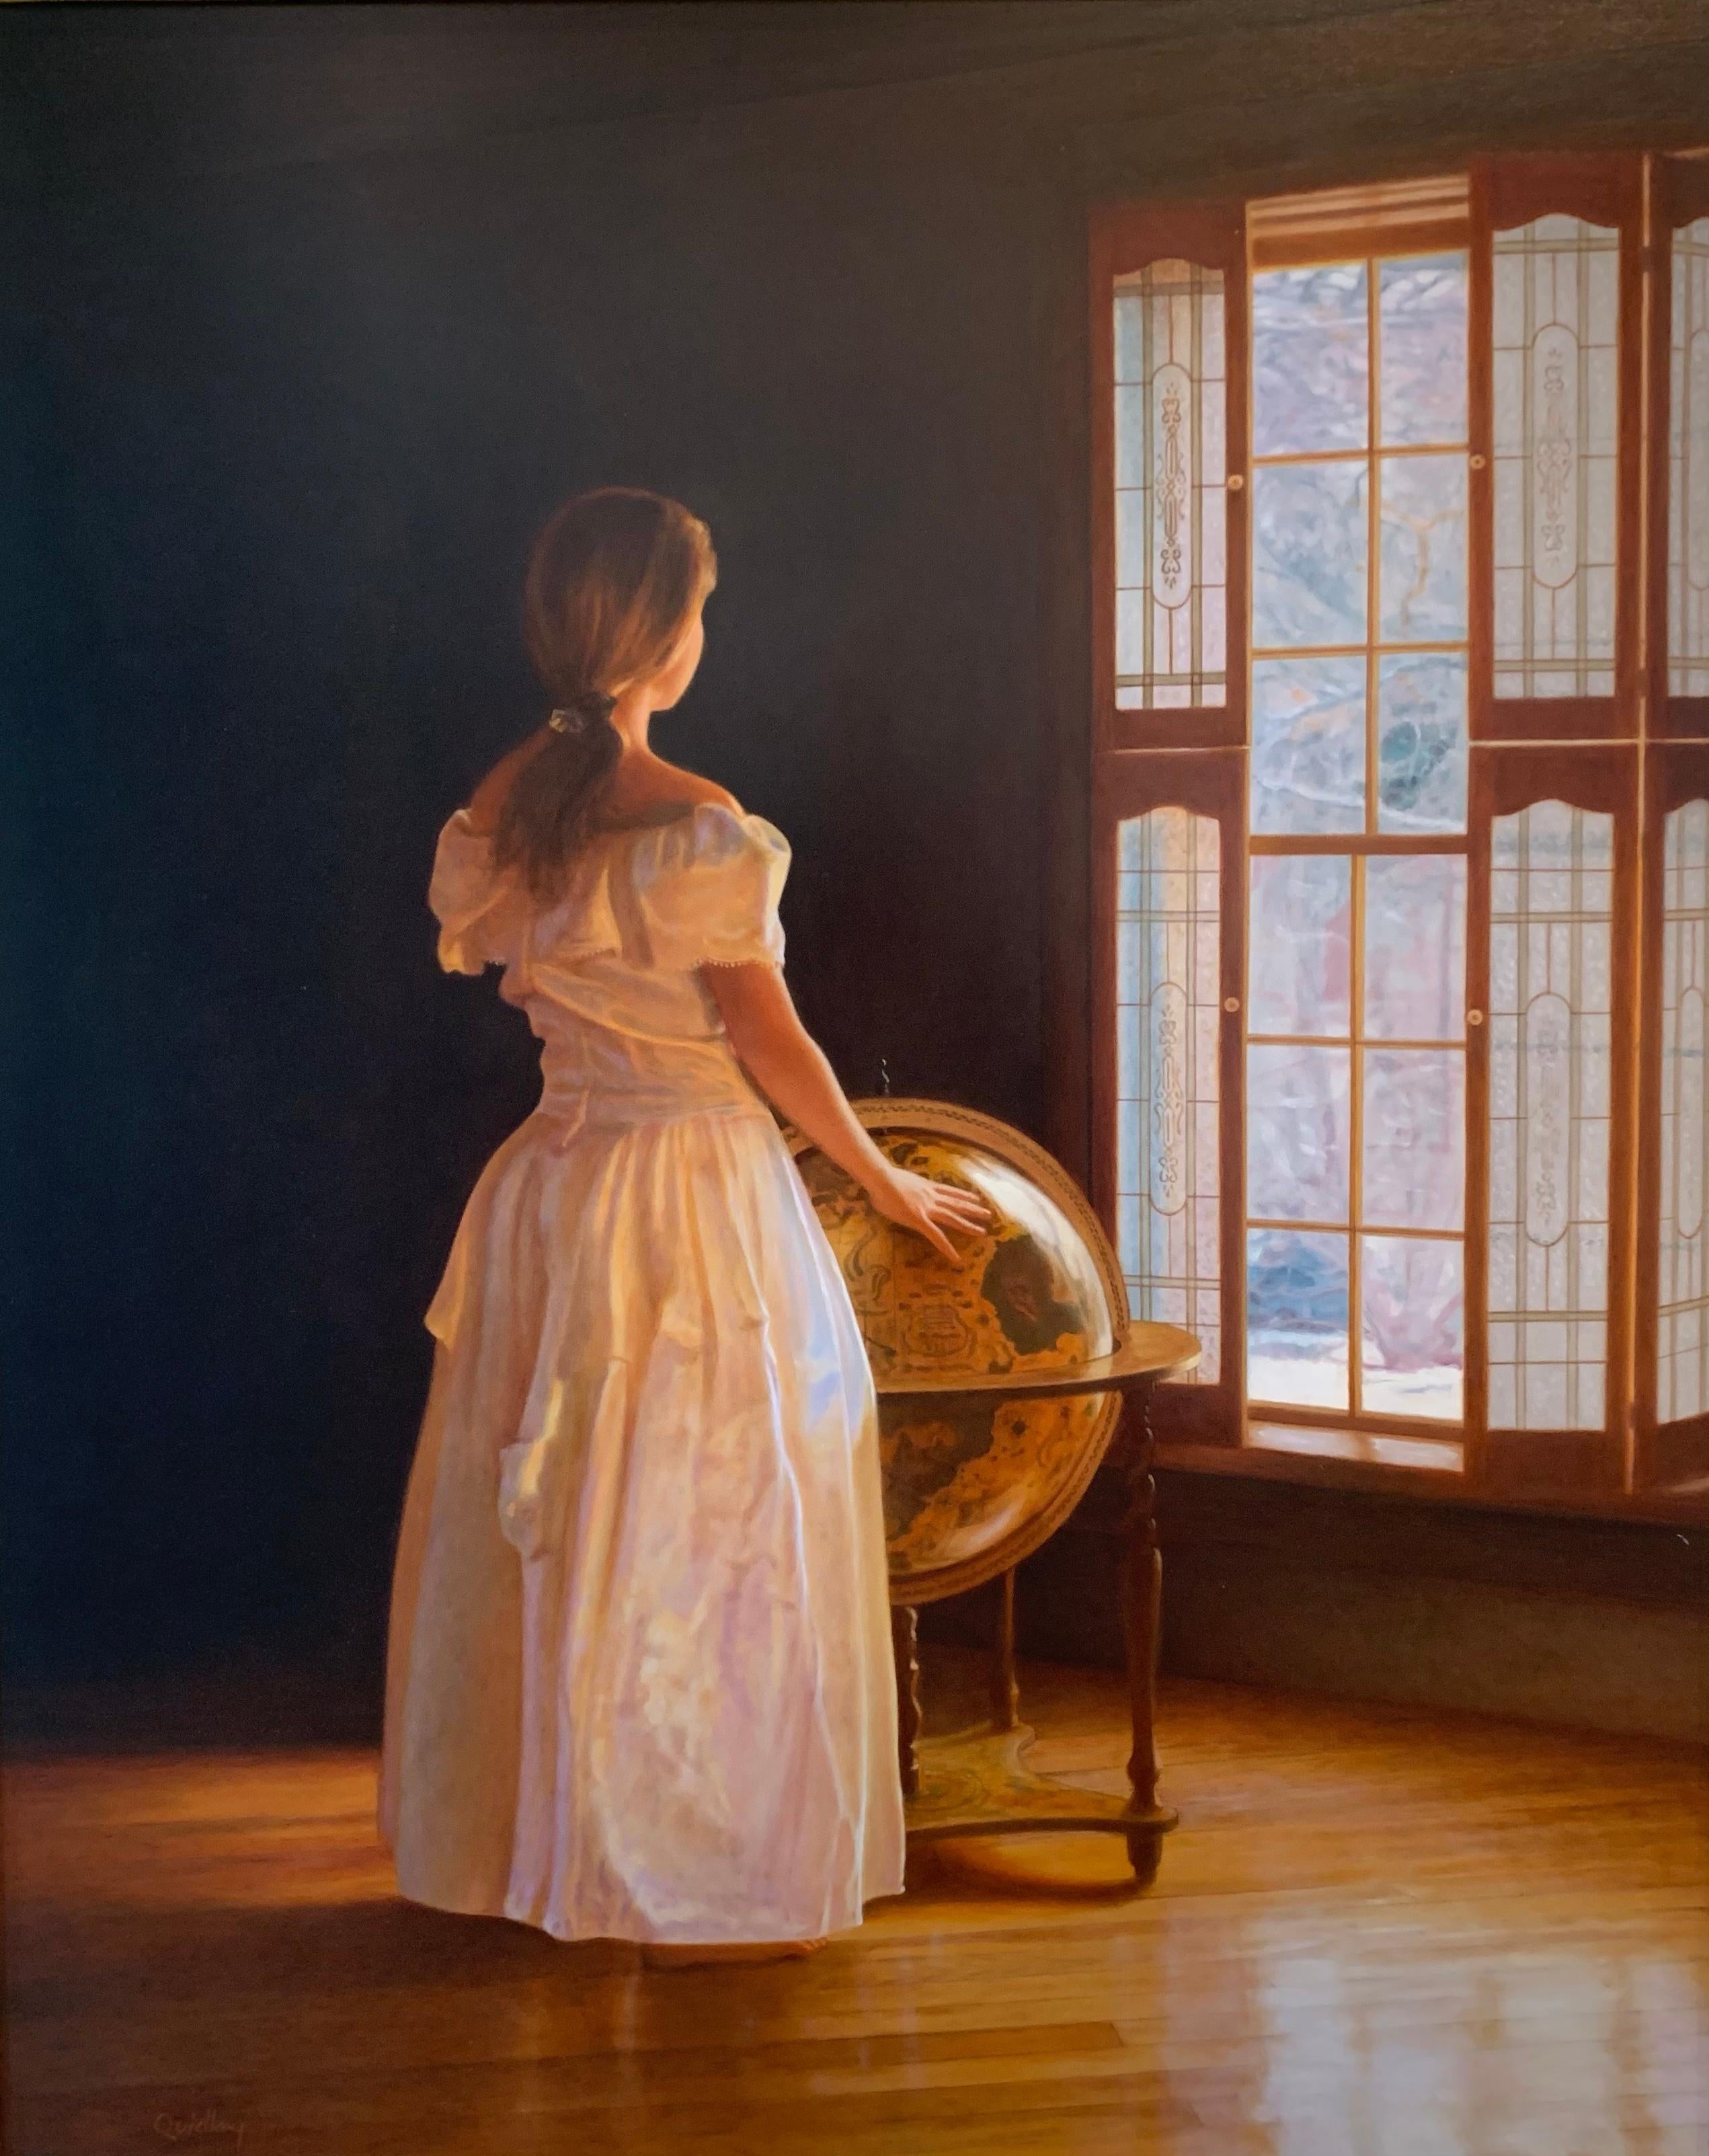 A young woman in a white lace dress stands in a dark room and stares out a window to the illuminated world outside, while her hands rest upon a globe. Typical of the artist the work, this piece is painted by his technique of laying thin glazes of